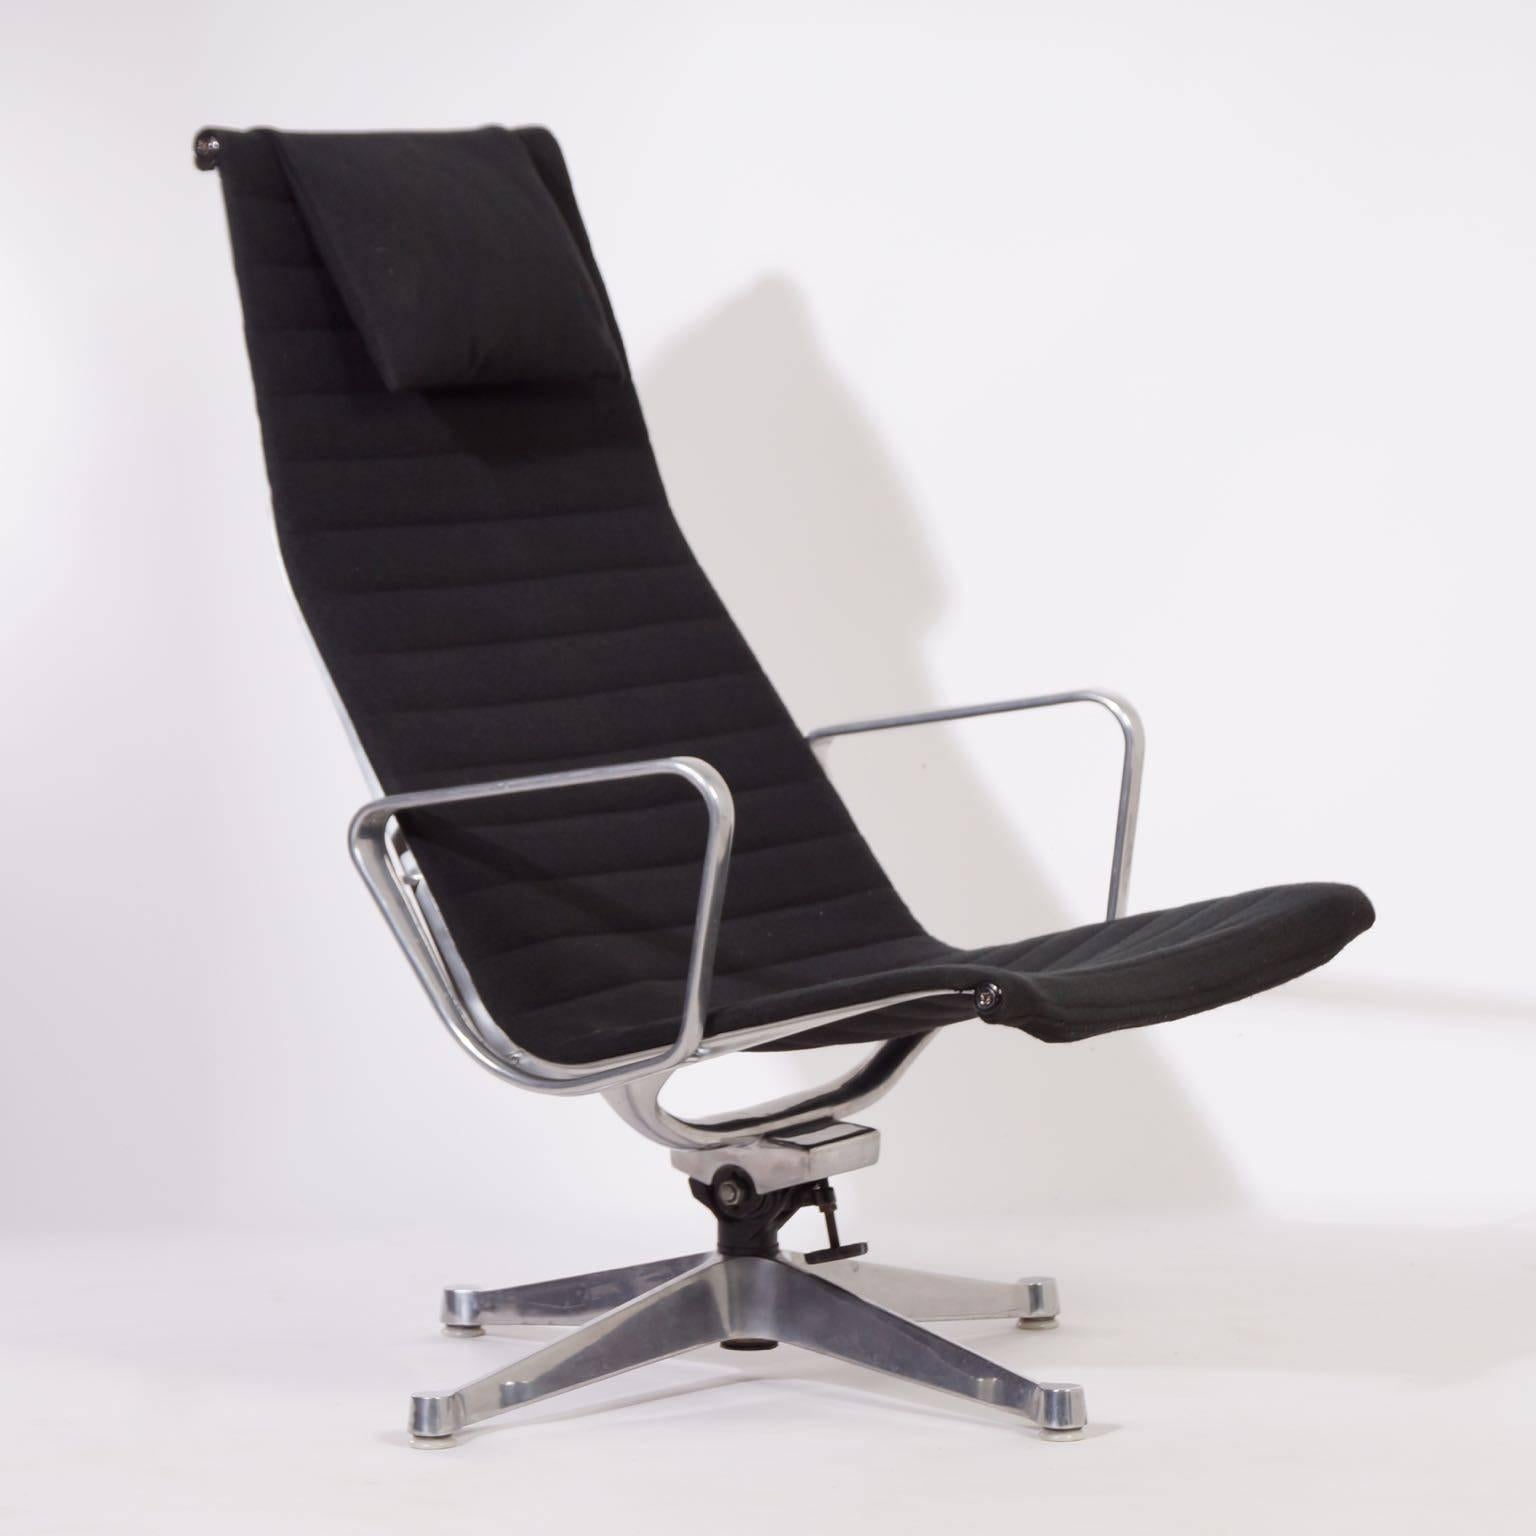 EA124 lounge chair designed by Charles and Ray Eames for Herman Miller in 1958. The Eames chair is from the famous aluminum series by Herman Miller. This is an original Herman Miller version from the 1960s. This chair with armrests can swivel and